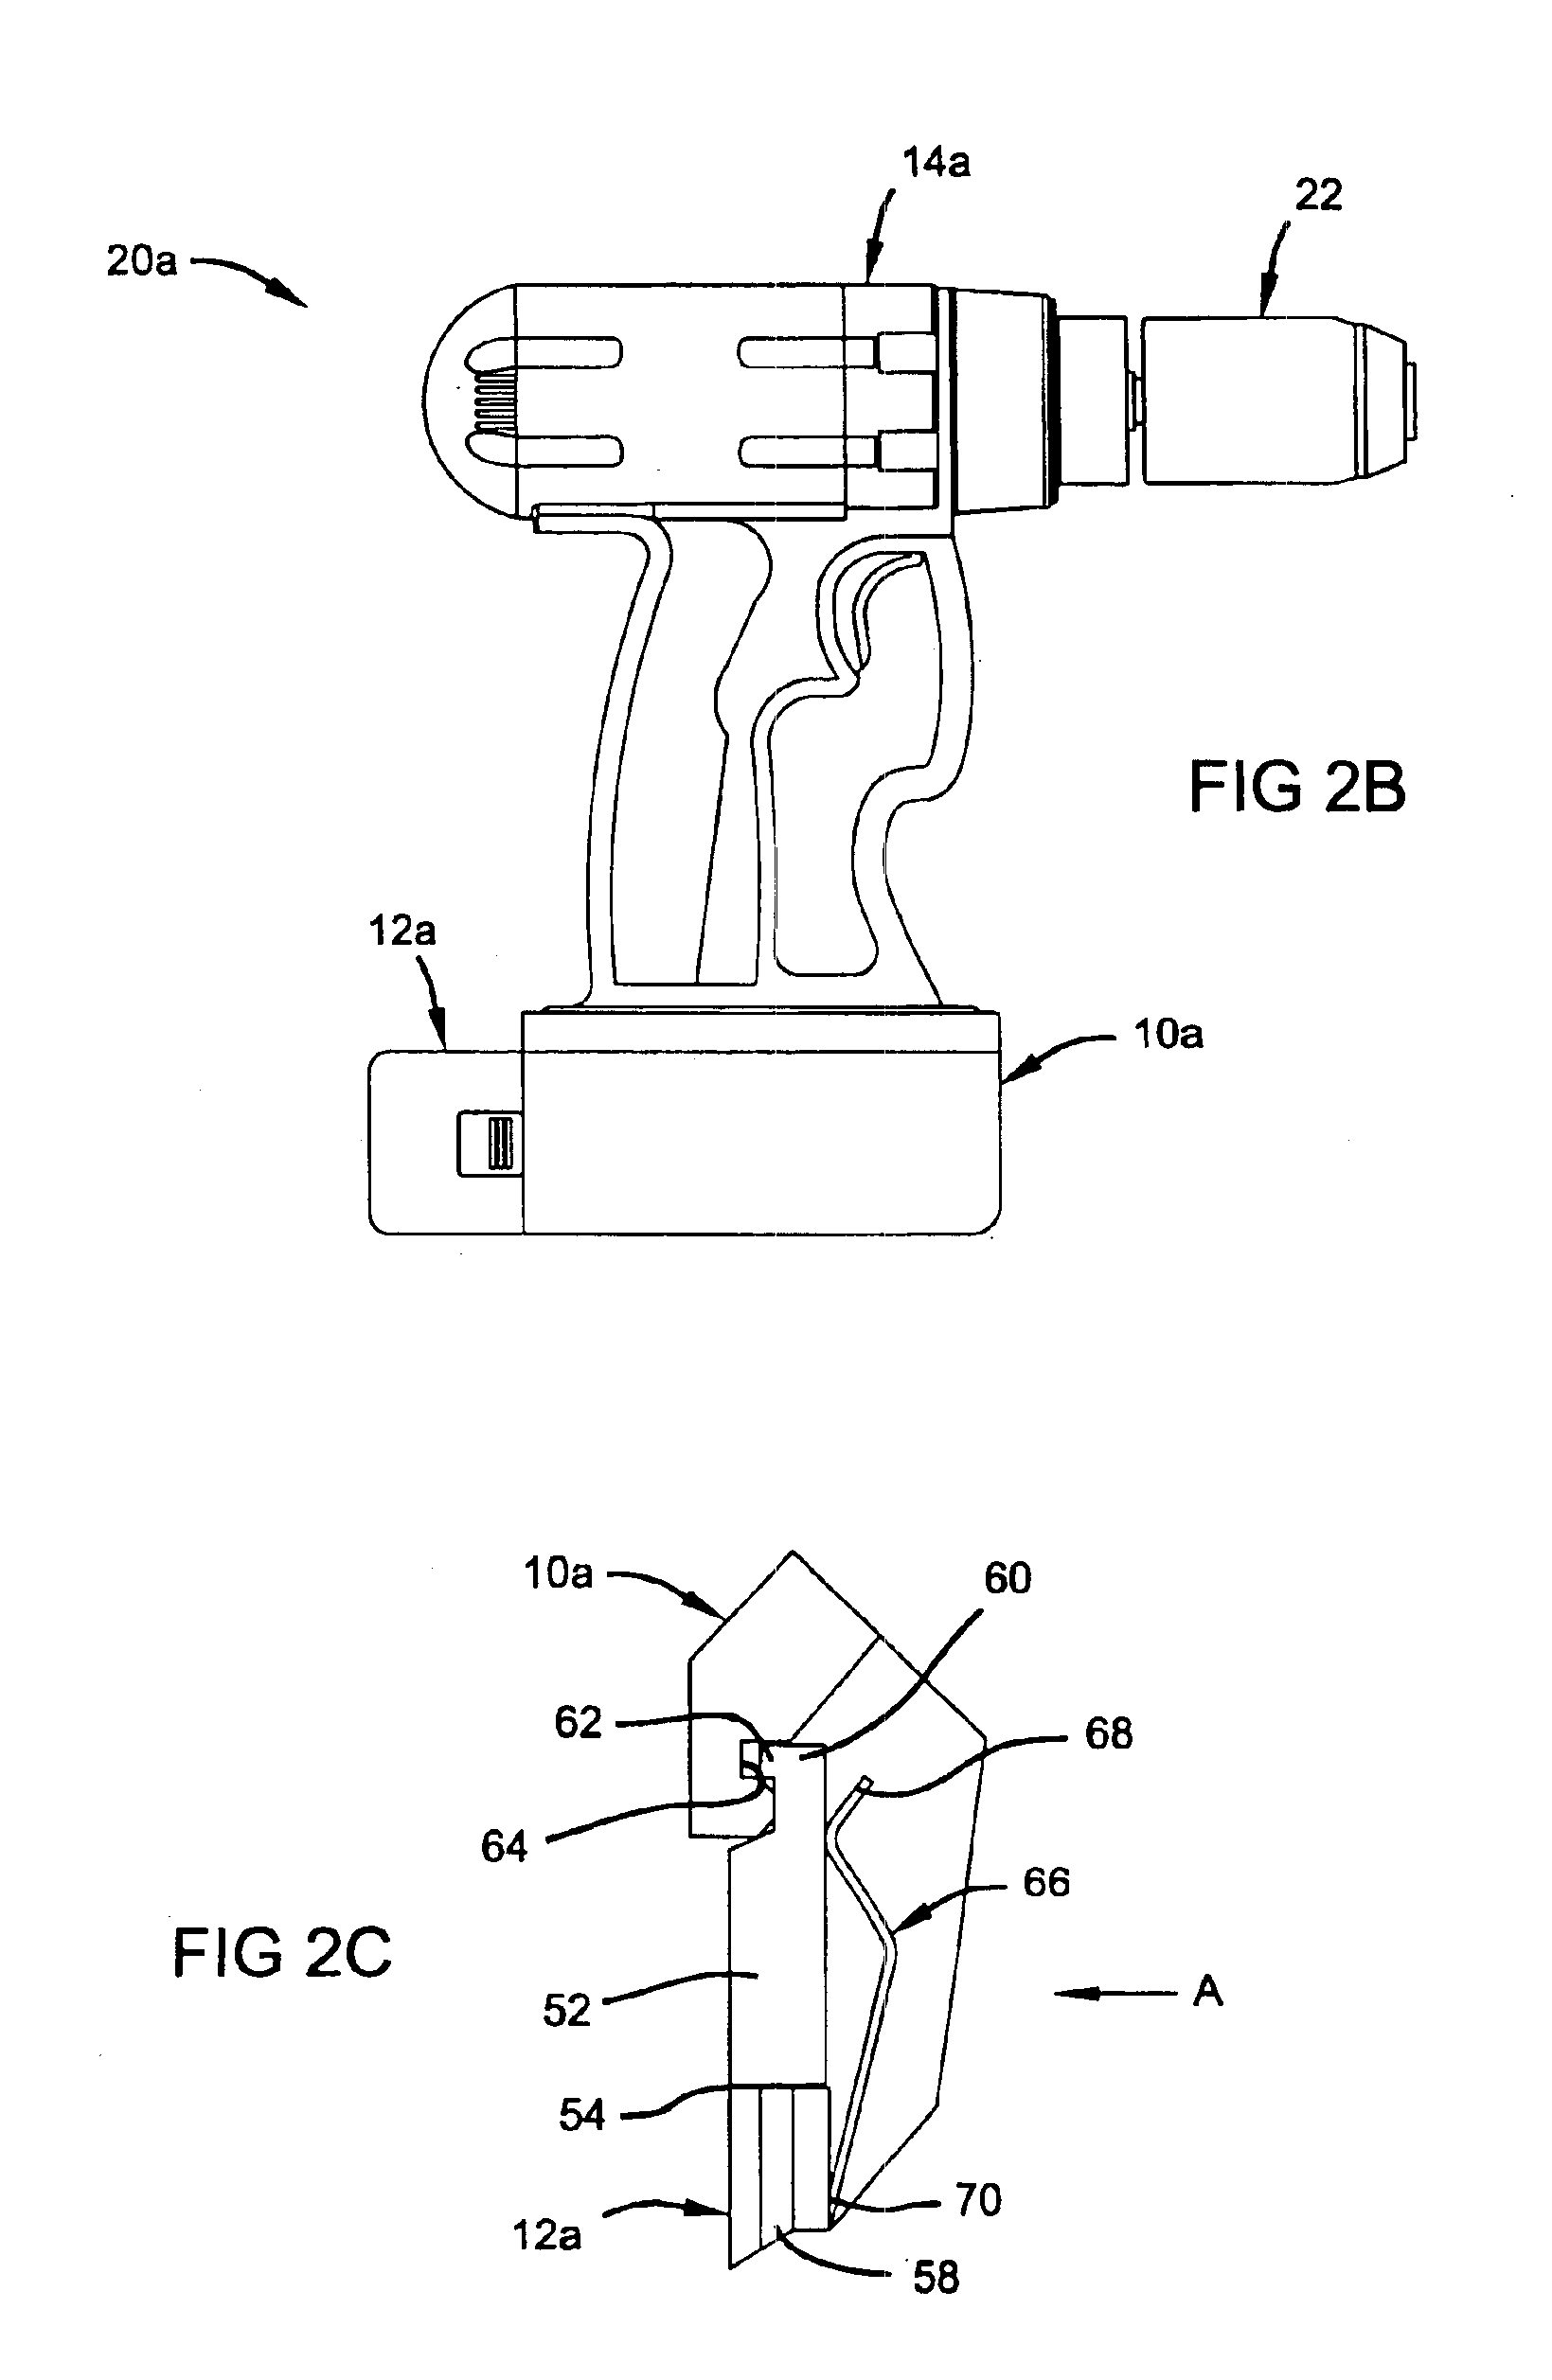 Battery adapter for a cordless power tool system and related method